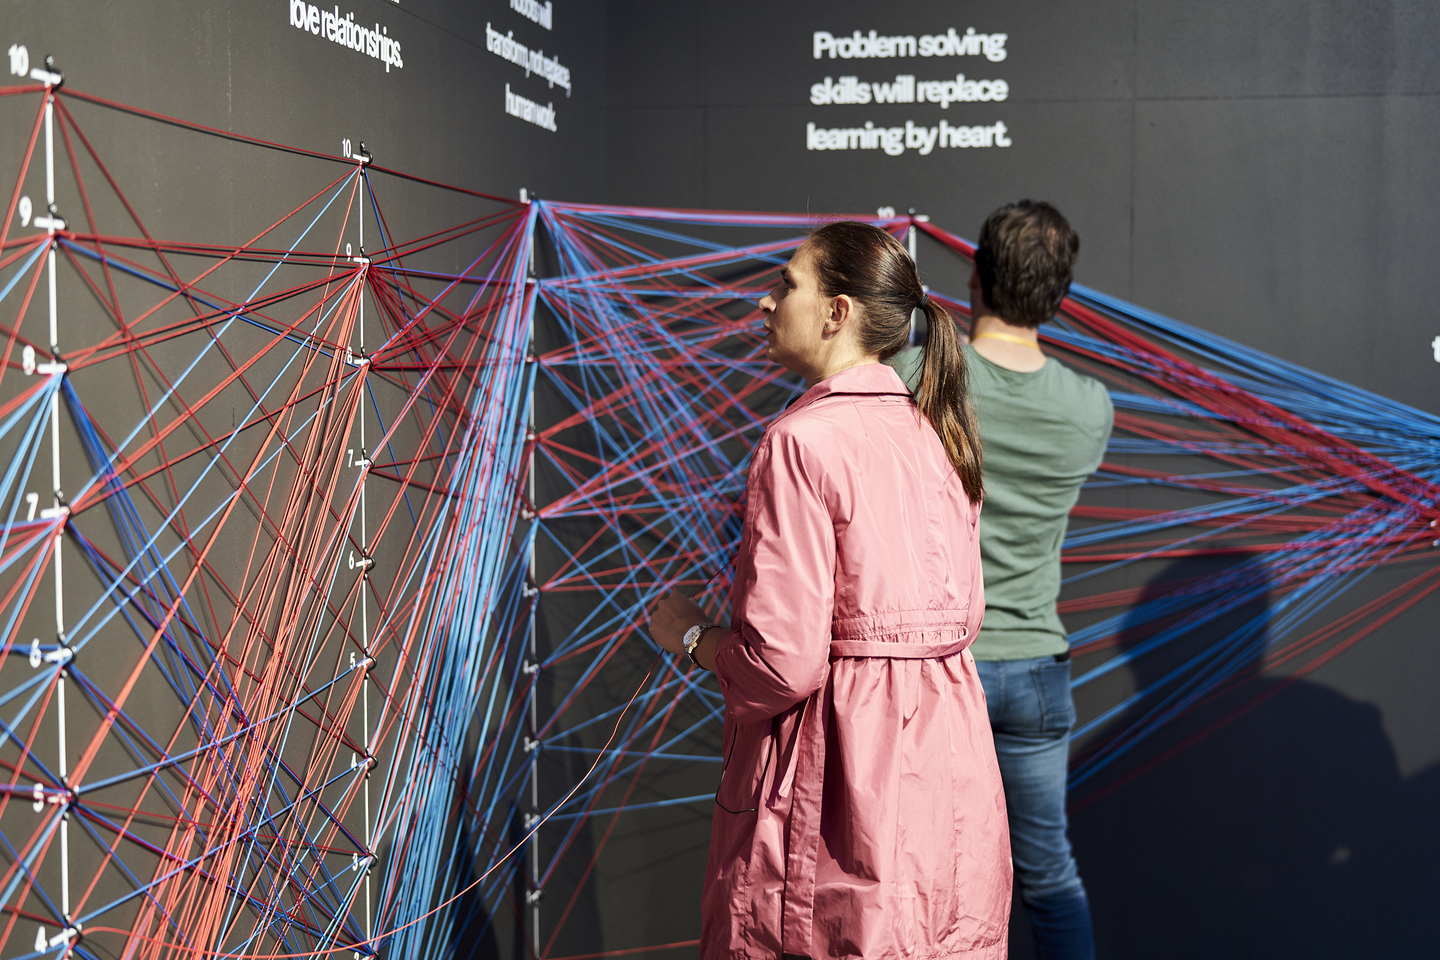 This interactive installation mapped attendee responses to questions about the future. Photo by Richard Pflaume/Daimler AG